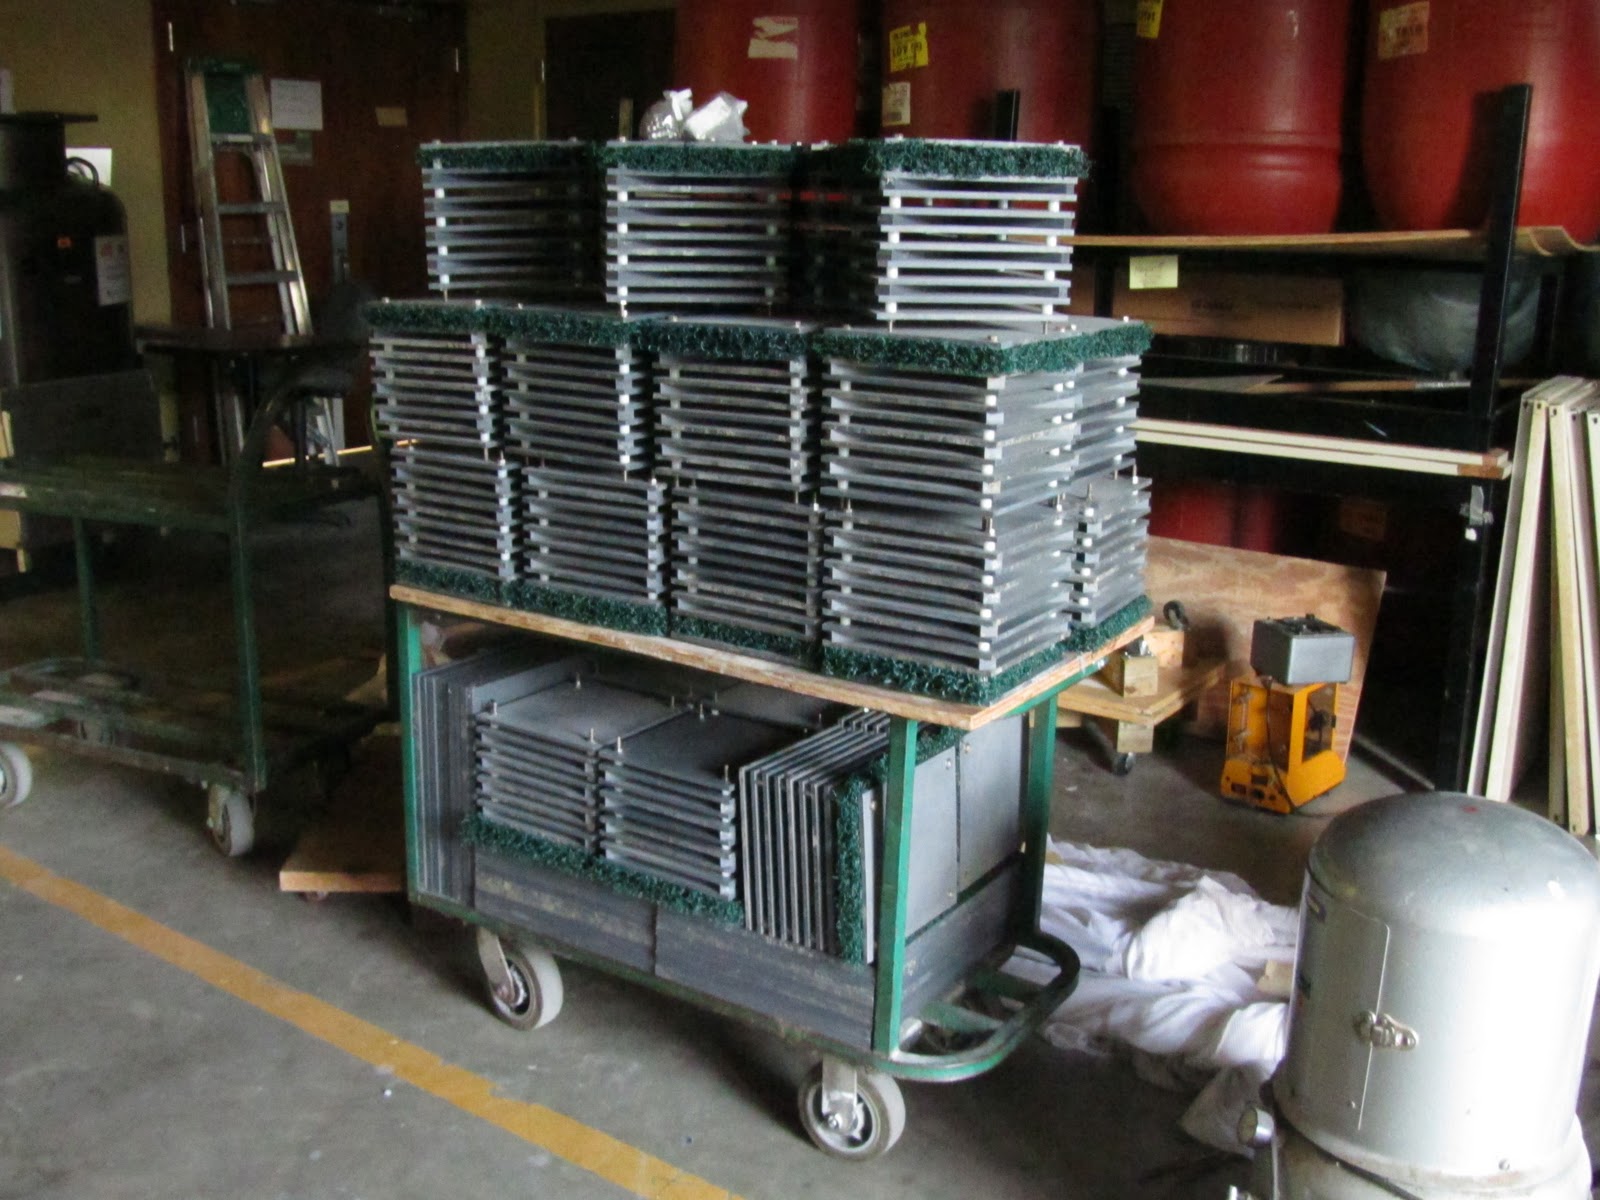 double-decker cart piled to the max with partially assembled ARMS